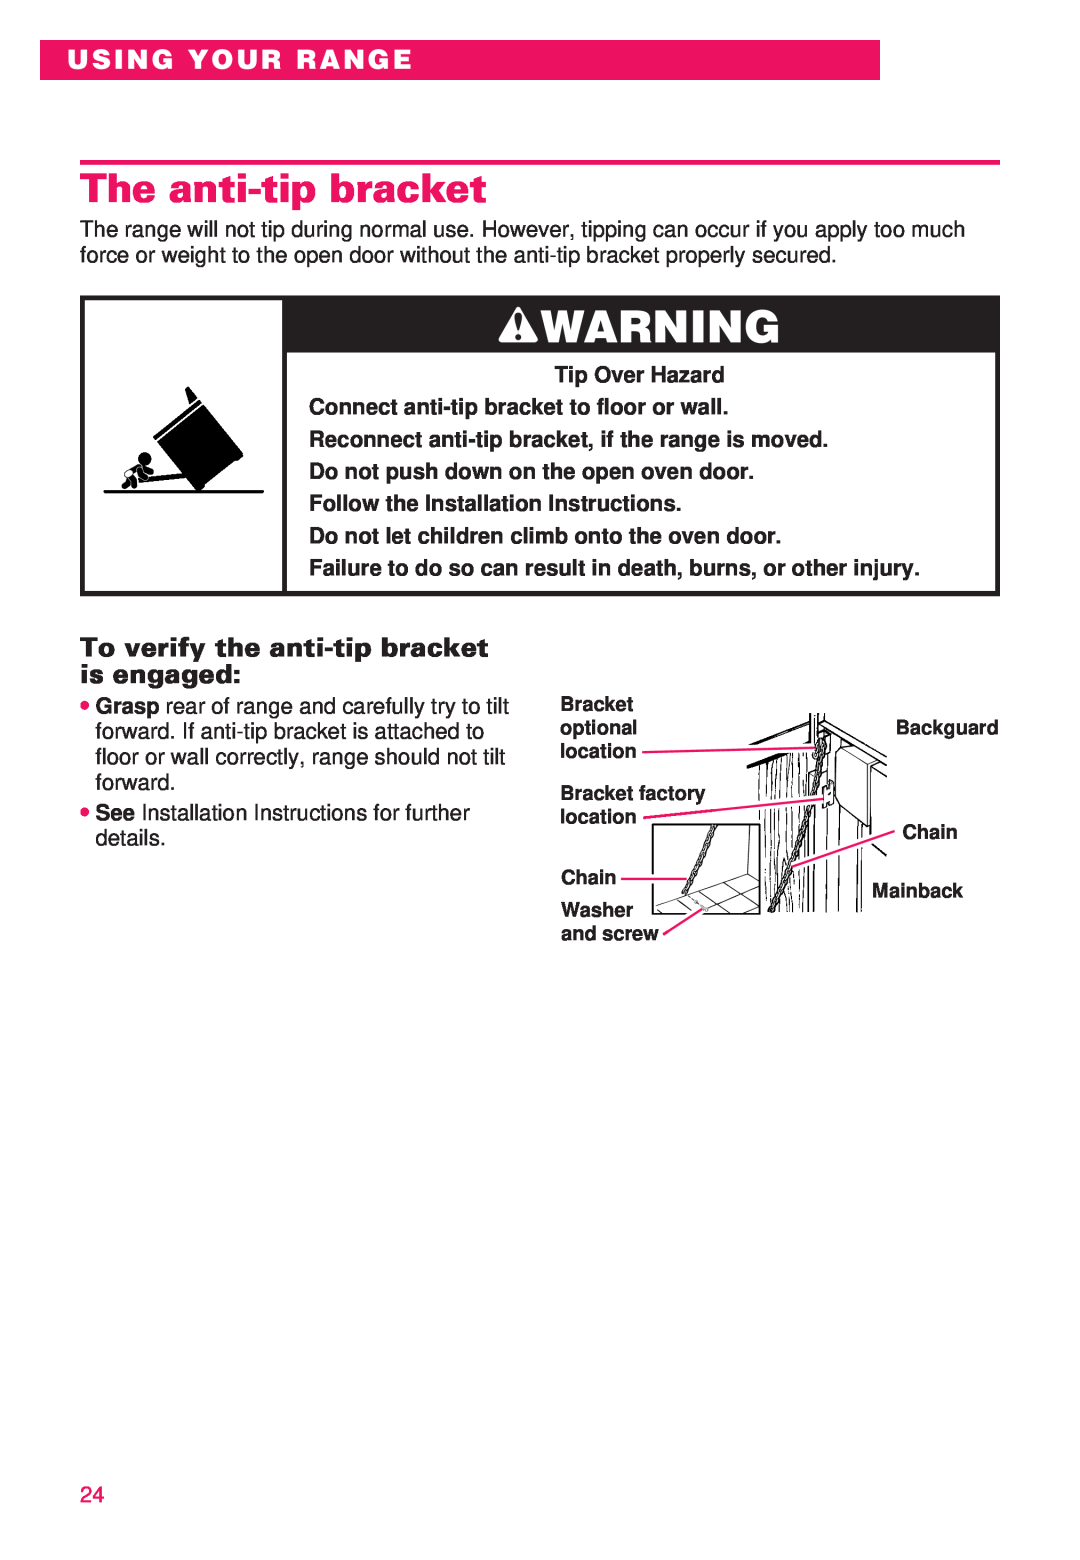 Whirlpool RS386PXE The anti-tip bracket, To verify the anti-tip bracket is engaged, wWARNING, Using Your Range 